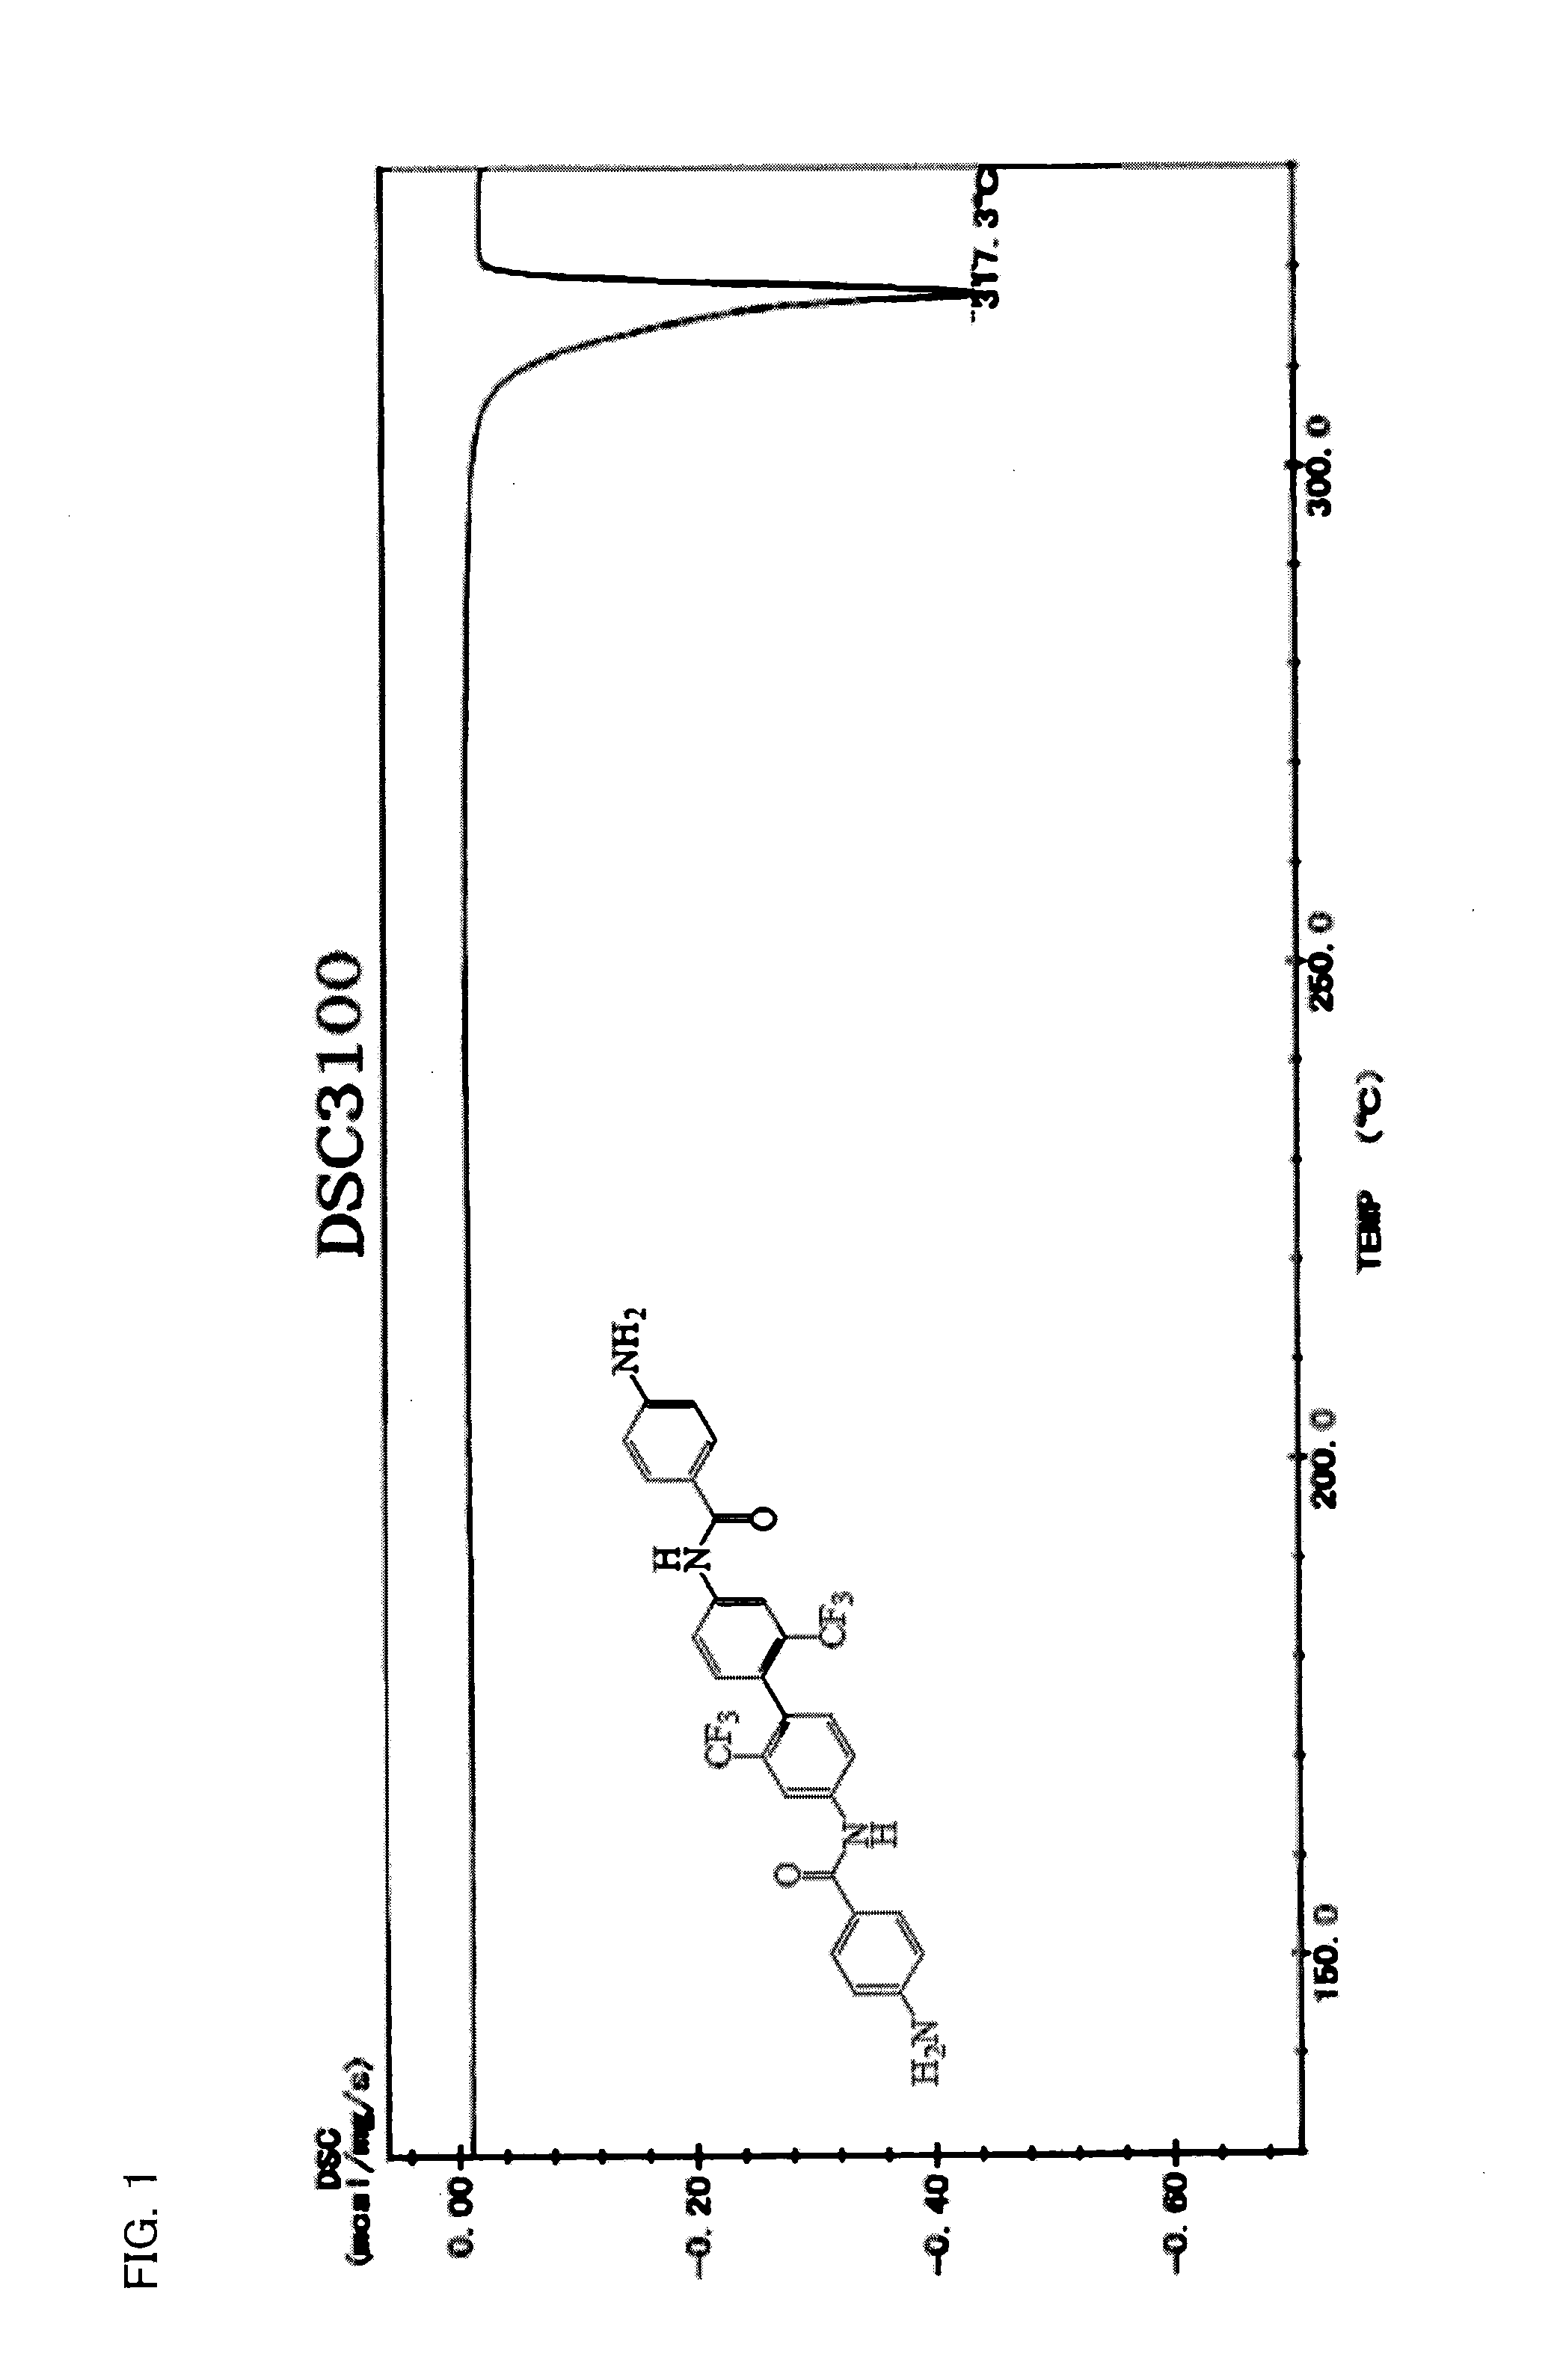 Diamine, polyimide, and polyimide film and utilization thereof